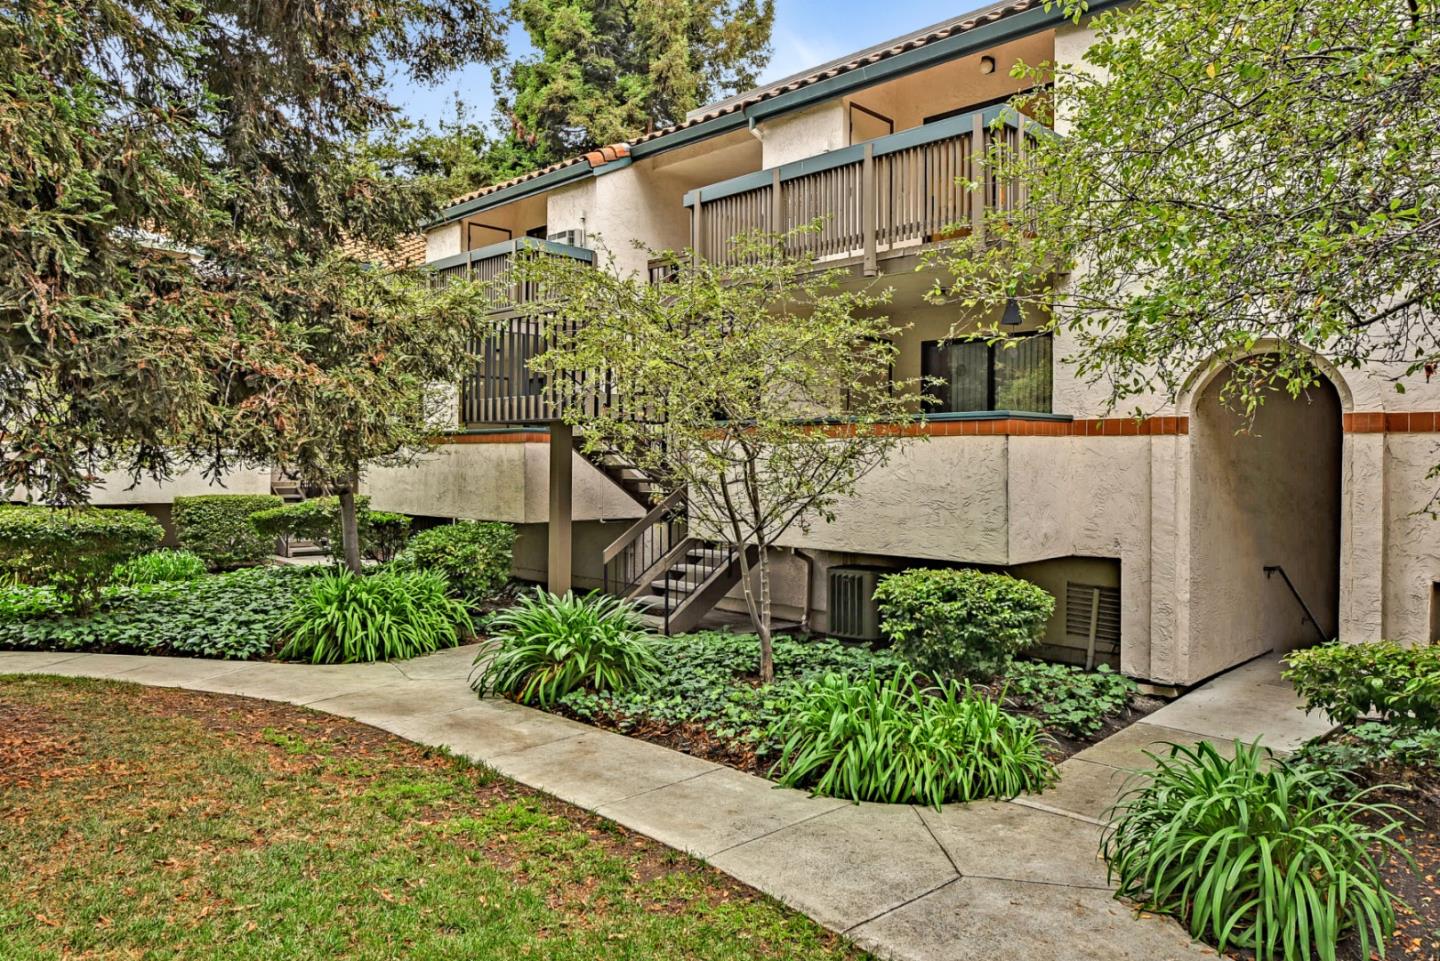 Investor Special with Built in Equity. BIG Price Reduction makes this an even greater opportunity to be in the desirable Fair Oaks Place Community in the Heart of Sunnyvale. This 2 Bedroom / 2 Bath unit with a Bright Open Floor Plan overlooks the soaring Redwoods. The unit is in need of some TLC and Personalization. Bring your paint brush and imagination and this unit will shine. Kitchen with Electric Oven and Range, Dishwasher and new garbage disposal. Primary bedroom is good size with plenty of closet space and bath with stall shower. Other bedroom is good size as well with extra cabinet space as well. Hall bath with shower over tub. Good size Living room / Dining Room combo with views. Full size washer and dryer in unit. Located just a stroll from the Pool and Spa. Central Heat and A/C keeps the temperature perfect year round. Unit has a Tandem Garage with Extra Storage. Desirable complex close to All Major Hitech Companies, HWYs and Shopping.